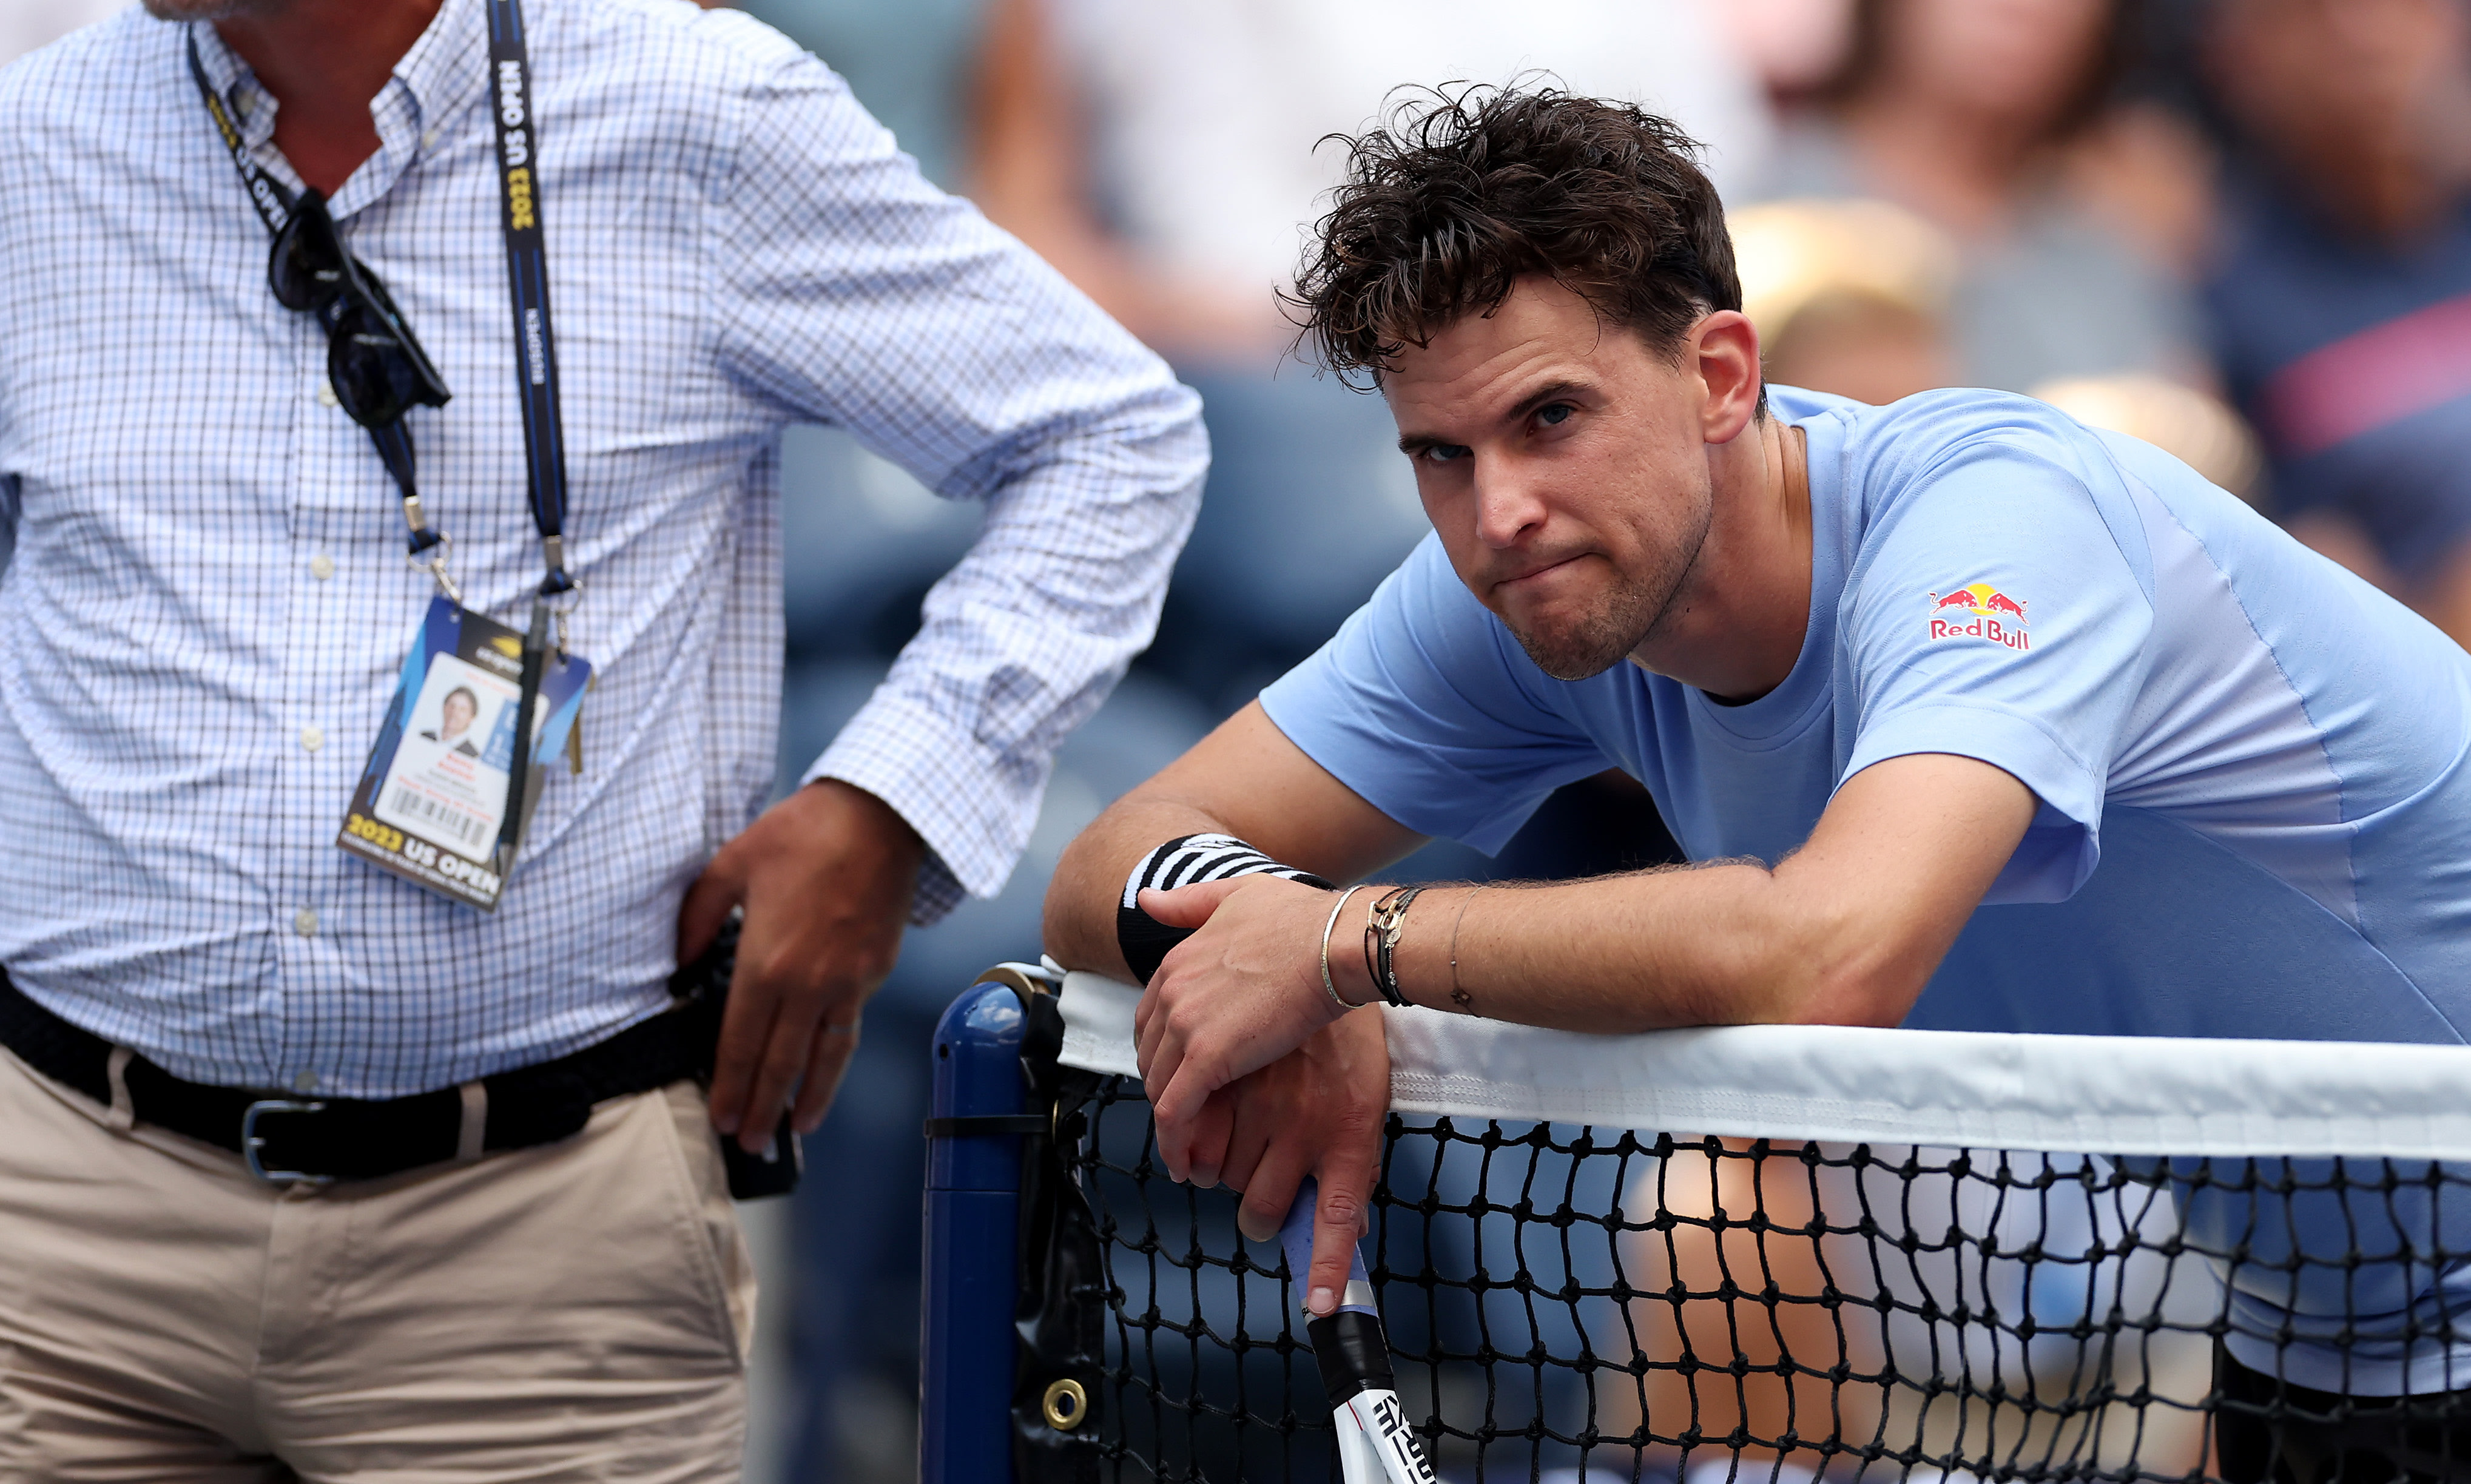 Ben Shelton Wins Anticlimactic Us Open Encounter With Ailing Former Champion Dominic Thiem